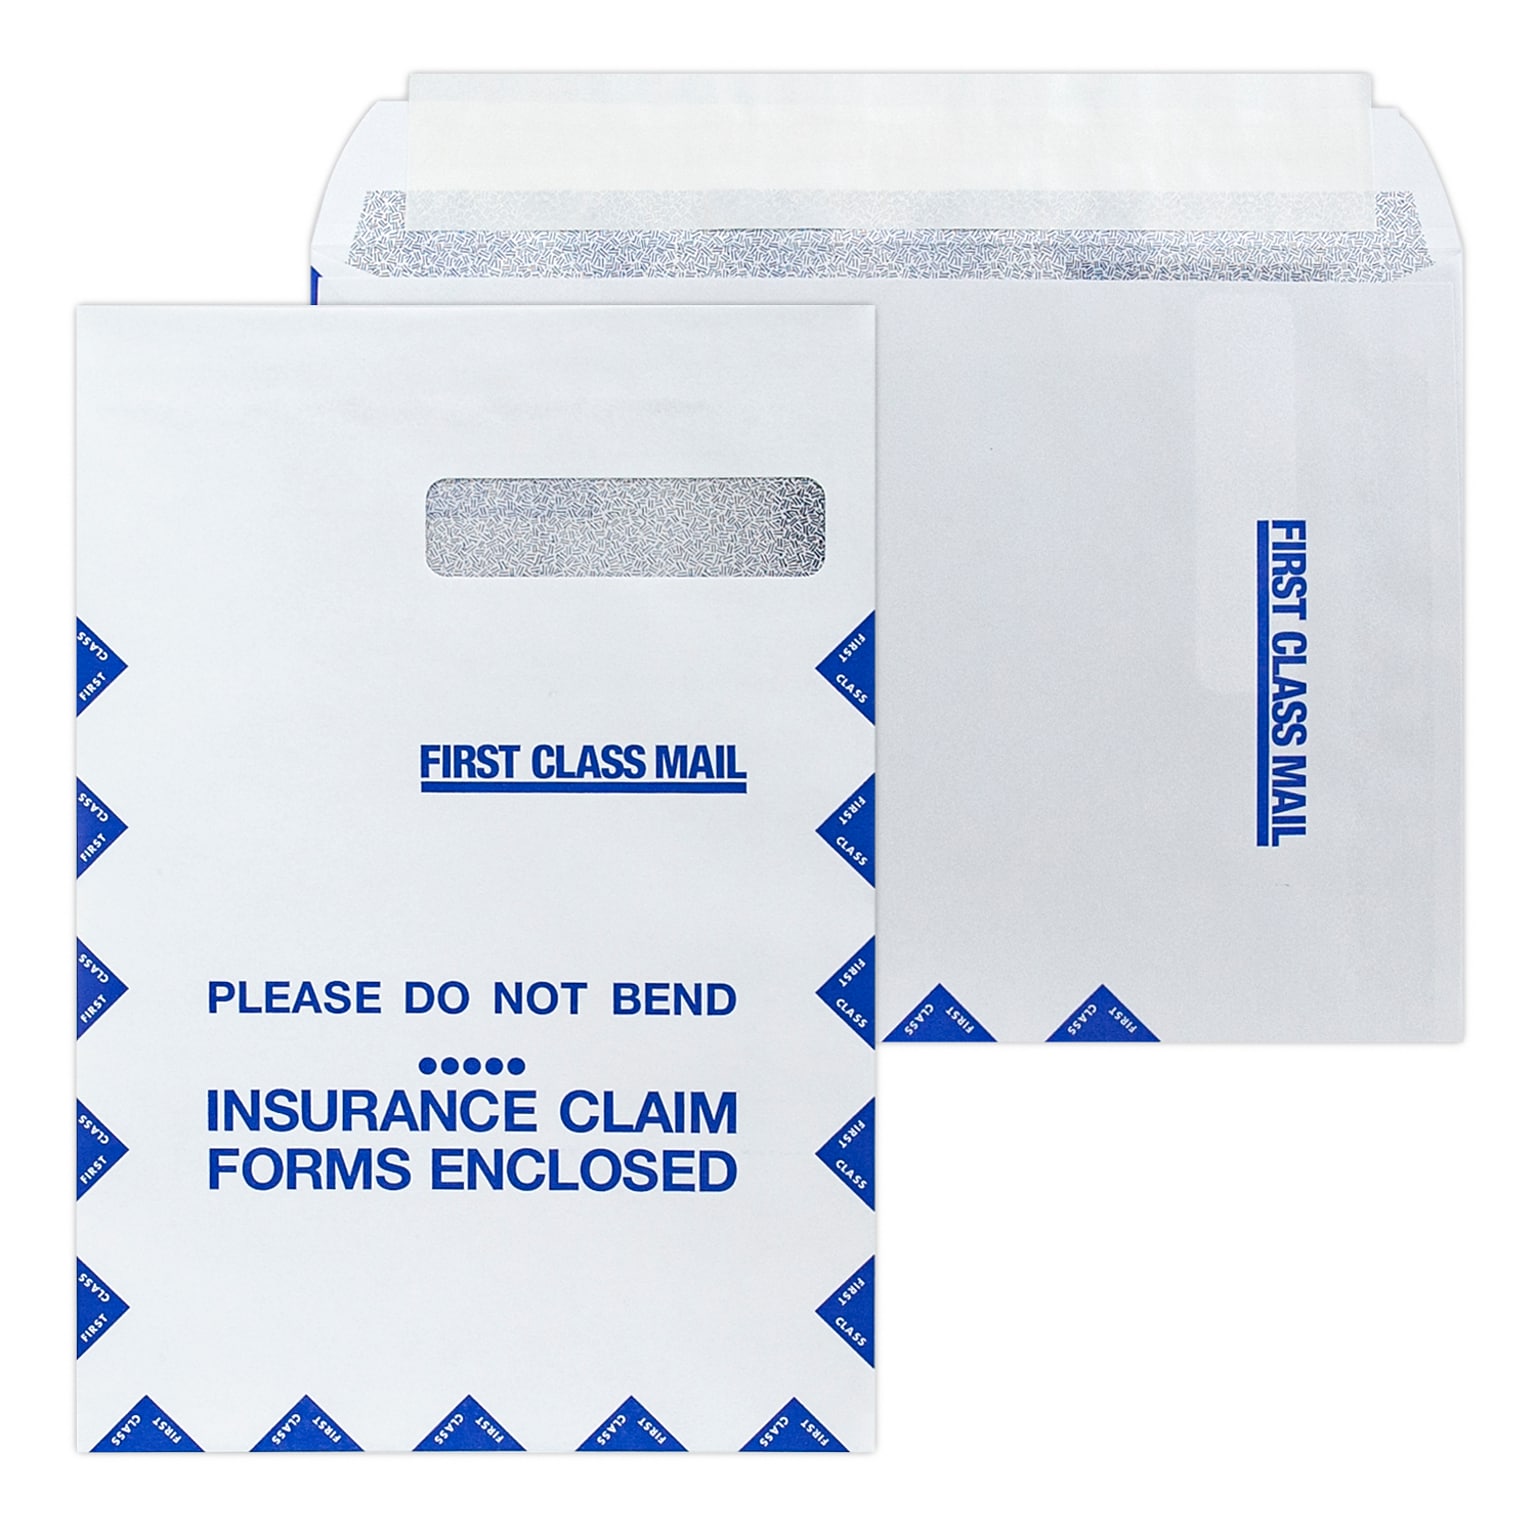 9 x 13 Resubmission Right Window Self Seal Envelopes with Security Tint, 24# White Wove, No Imprint, 250 / Pack